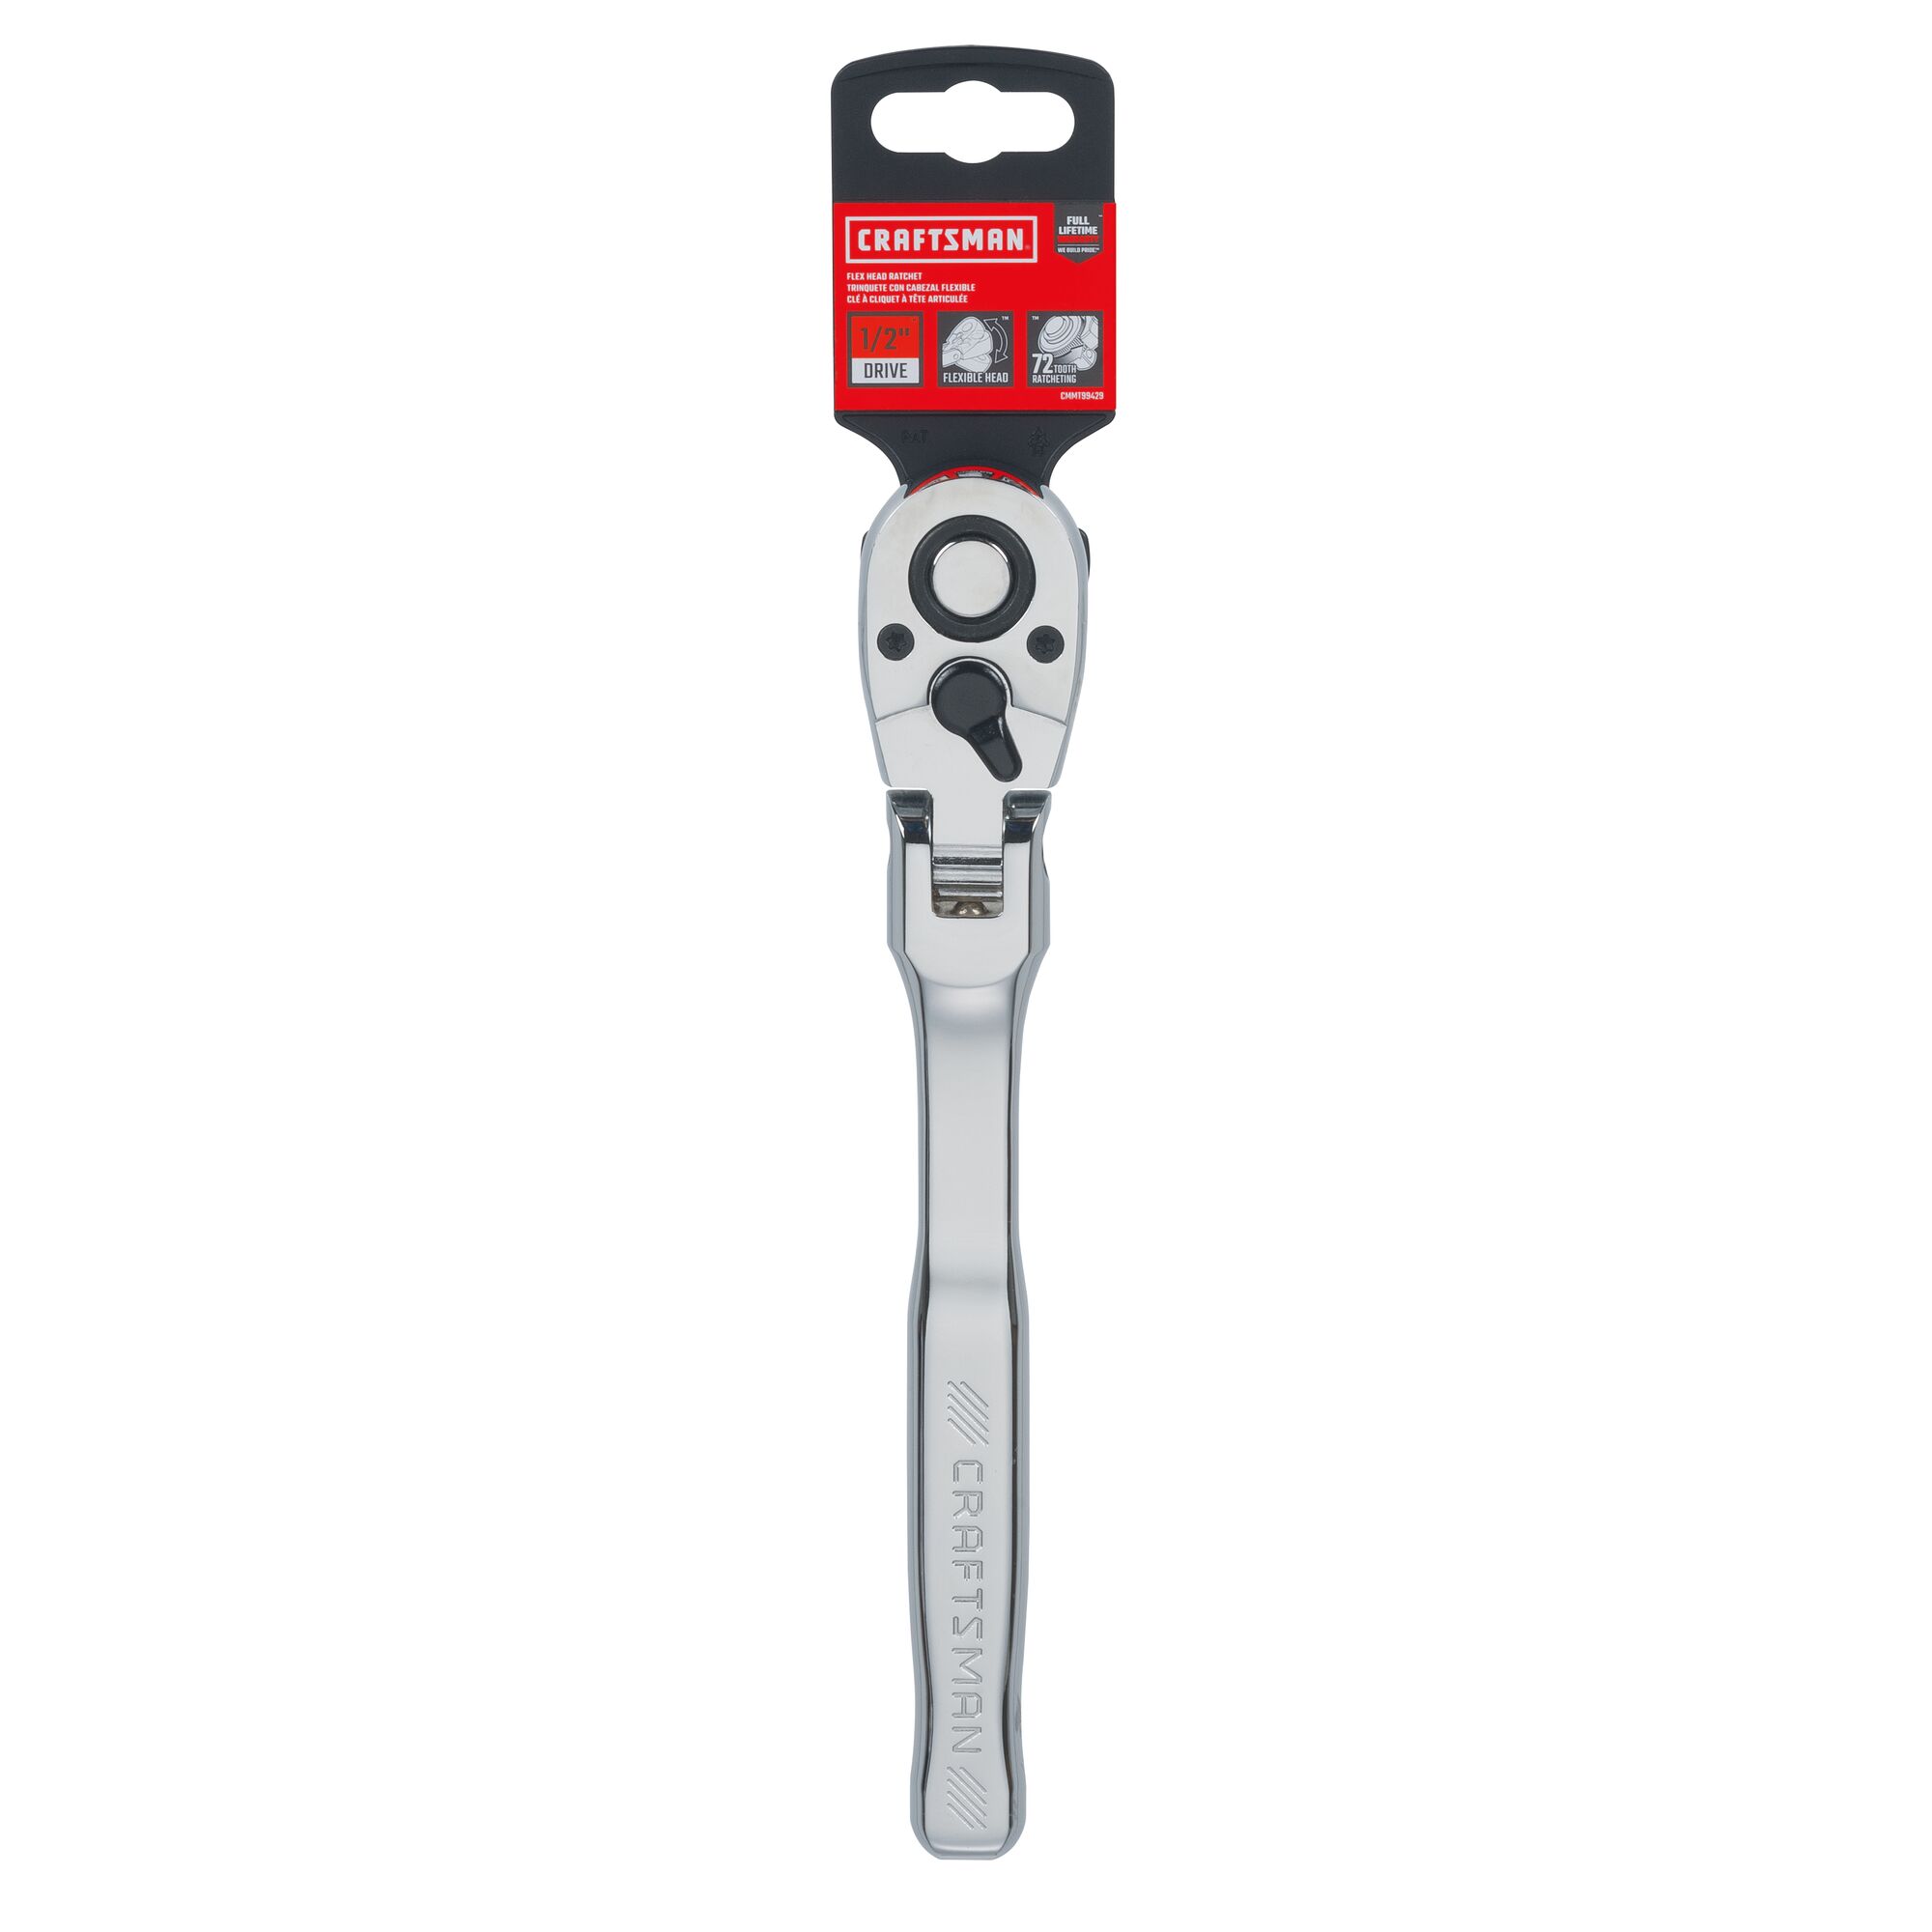 Profile of 72 tooth half inch drive quick release flexible head standard ratchet.